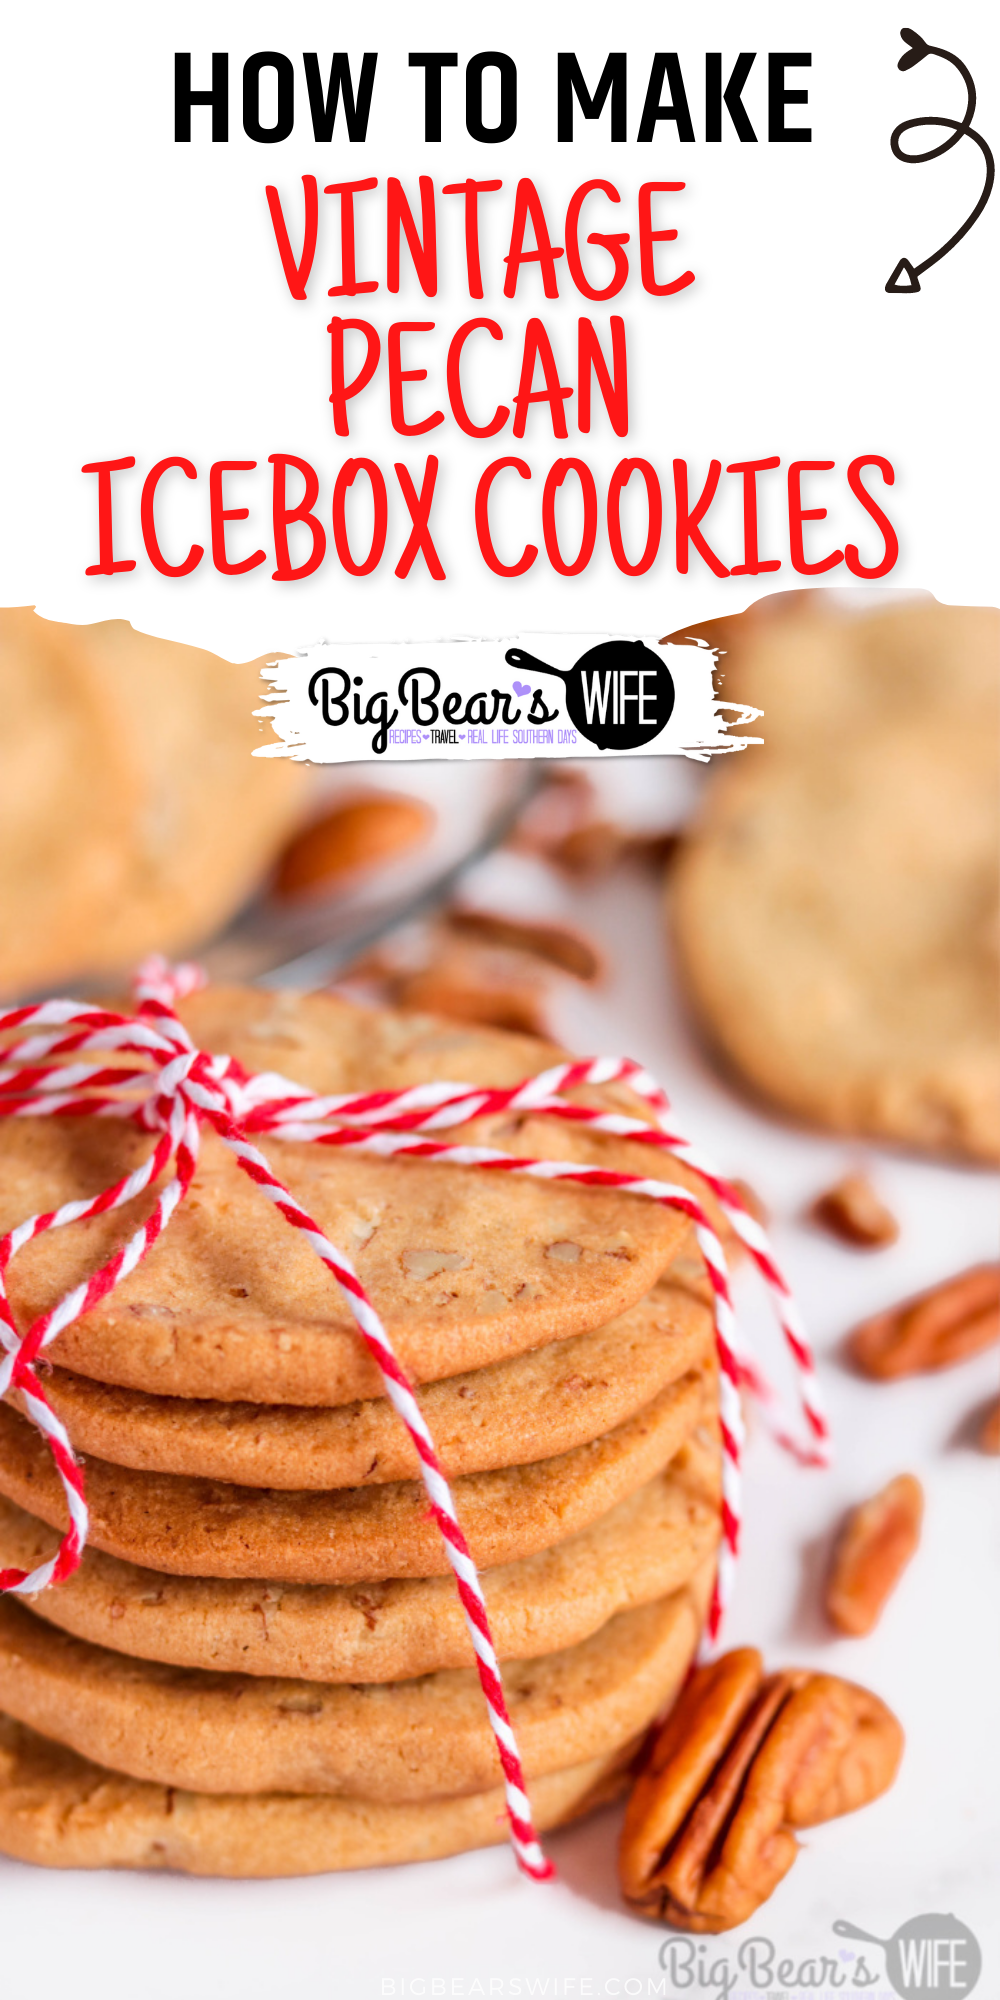 These Vintage Pecan Icebox Cookies are a tried and true classic recipe that first appeared in the Imperial Sugar 1930 edition of A Bag Full of Recipes cookbook. Make the dough, and let it chill overnight before slicing and baking this classic cookie that has stood the test of time. via @bigbearswife